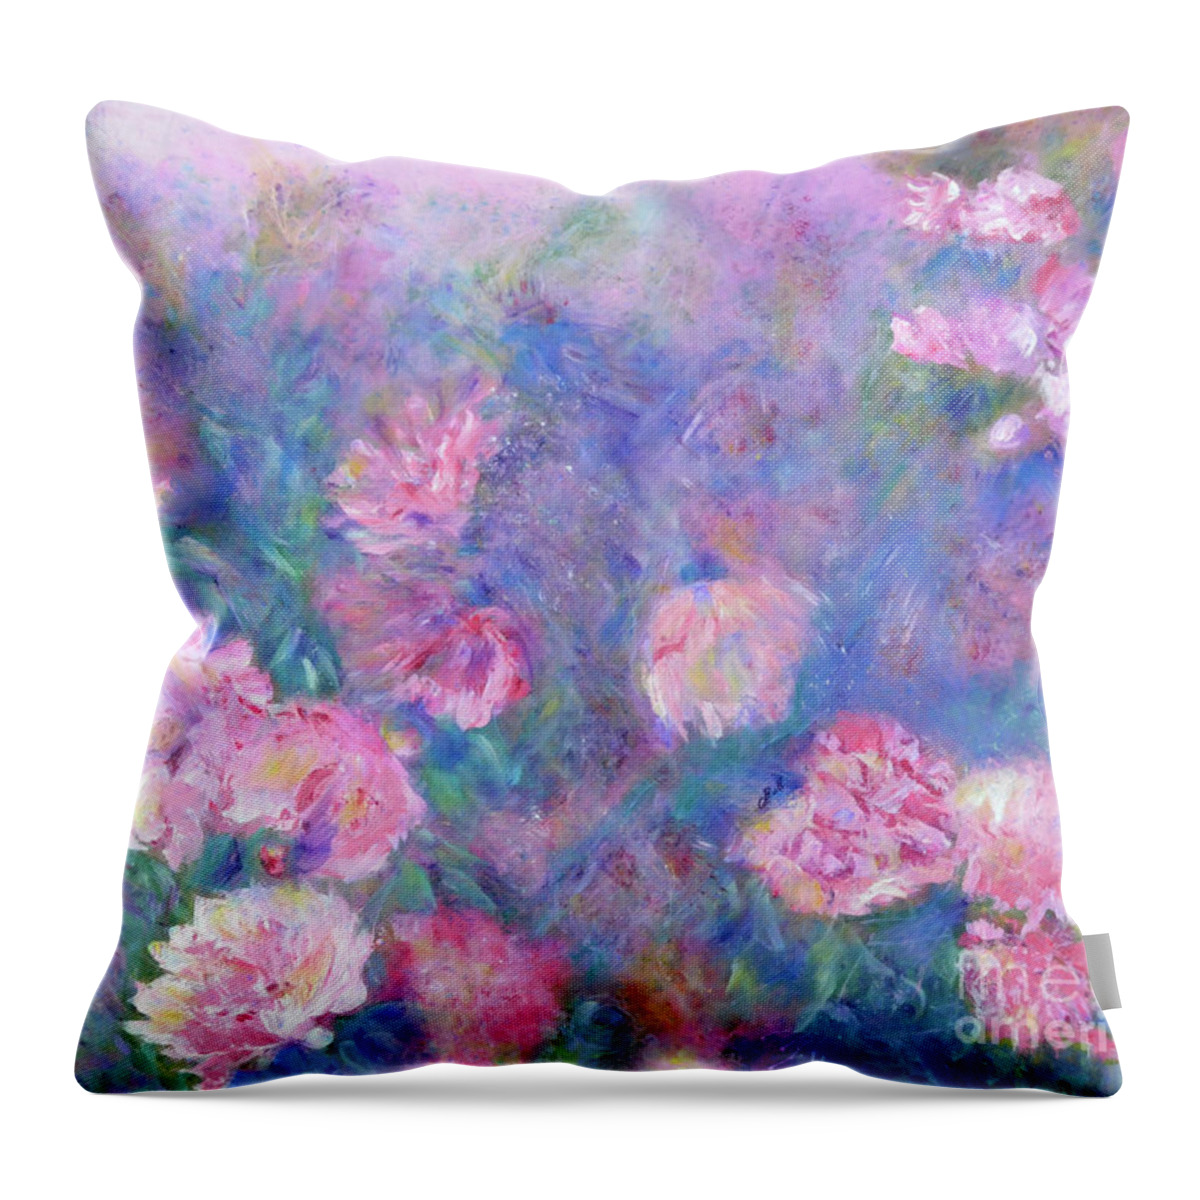 Peonies Throw Pillow featuring the painting Peonies by Claire Bull